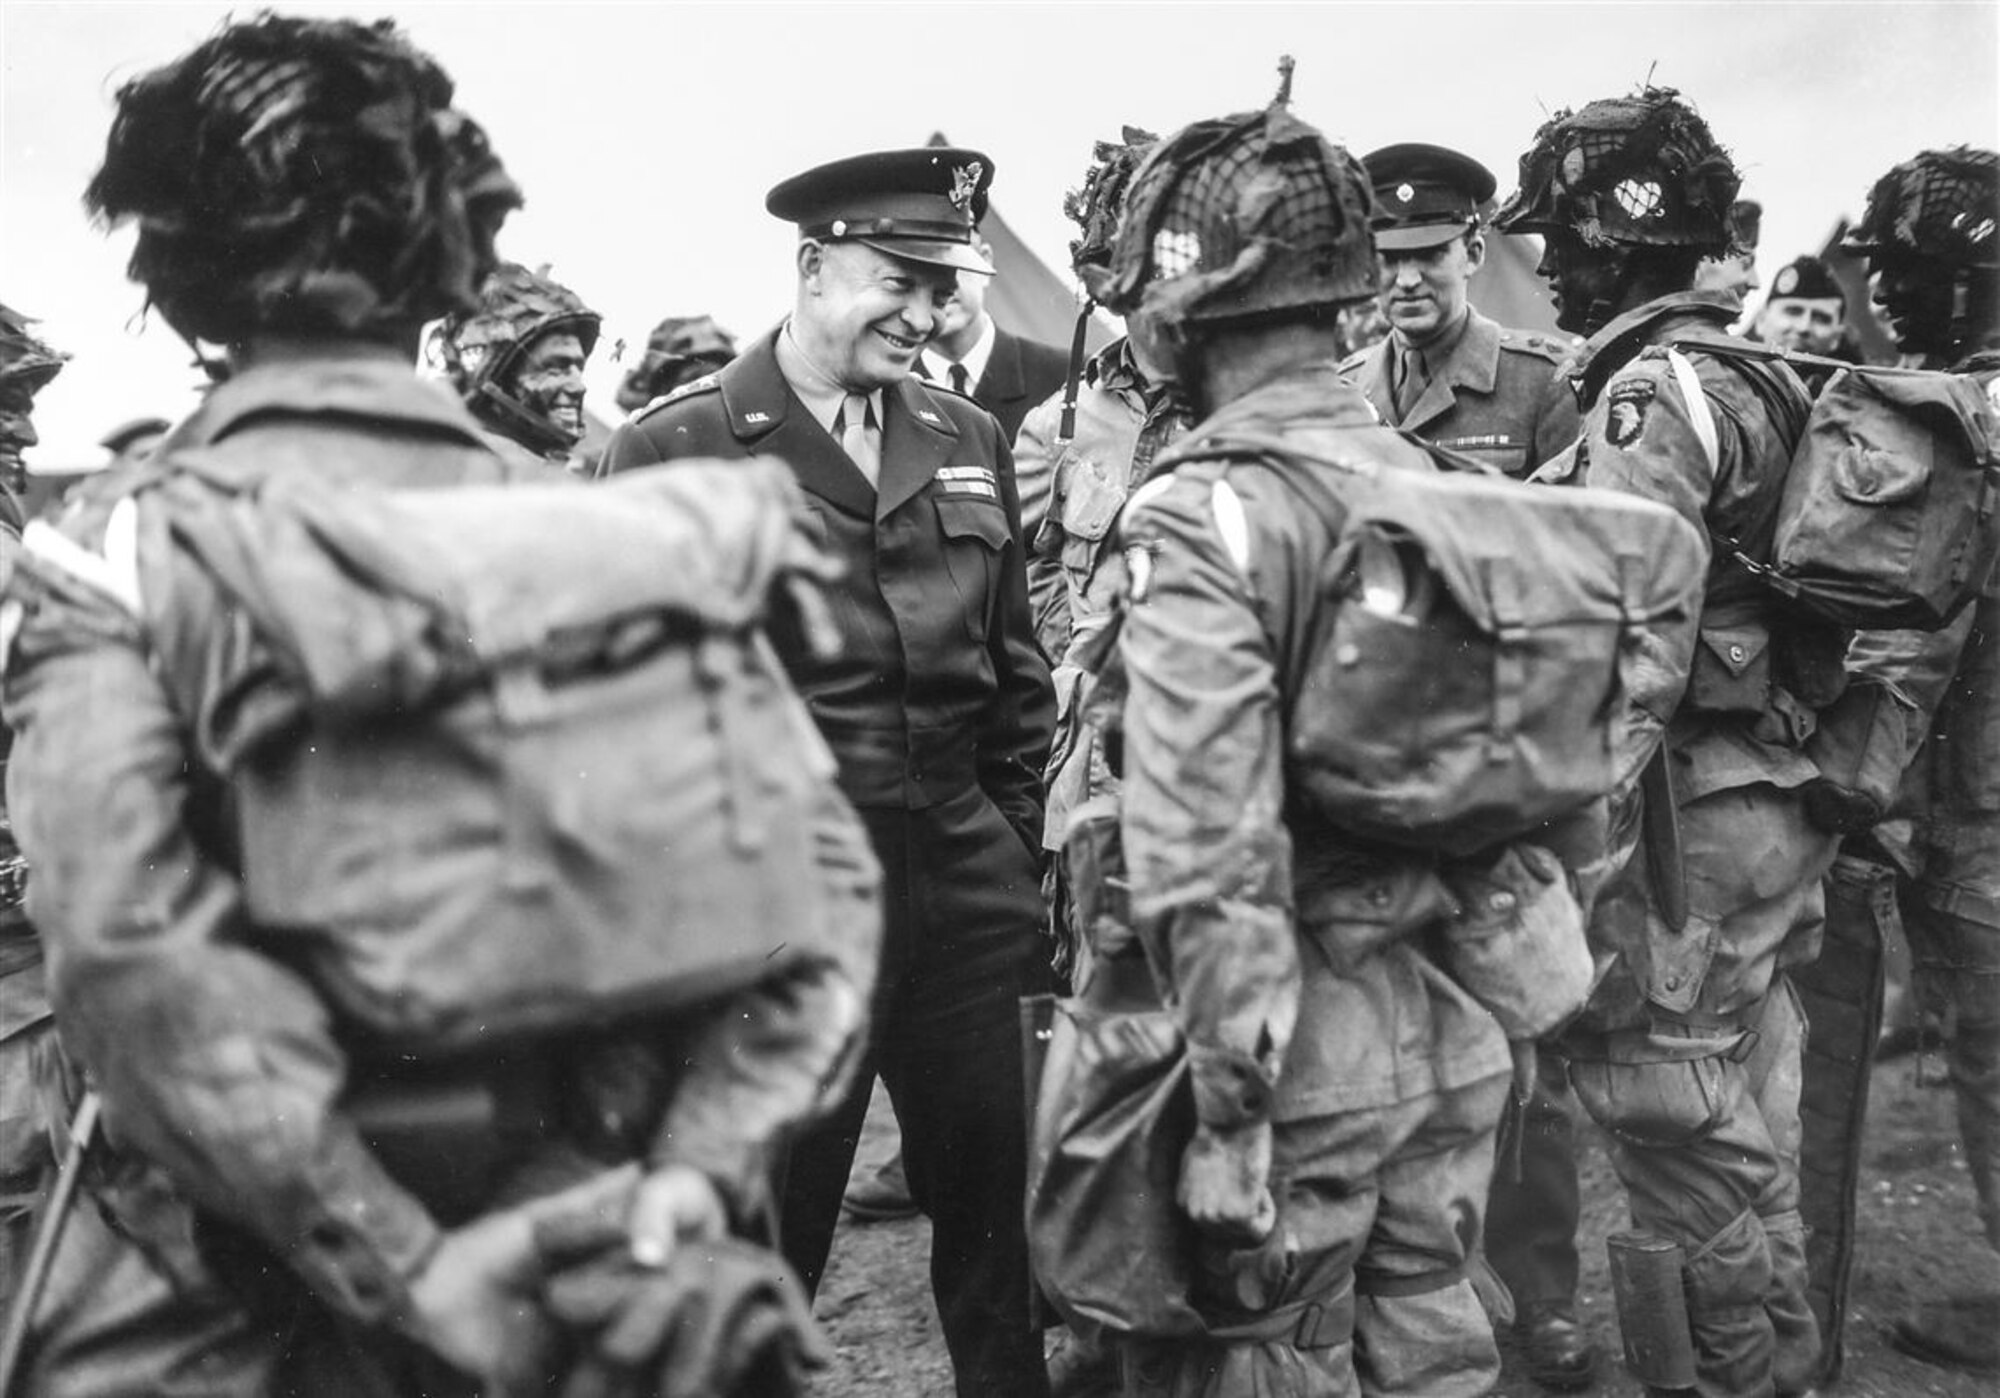 Gen. Dwight D. Eisenhower speaks with members of the 101st Airborne Division at the Royal Air Force Welford Park airfield, England, June 5, 1944. Eisenhower and Winston Churchill visited RAF Welford the night before D Day Operation Overlord during World War II. (Courtesy photo)